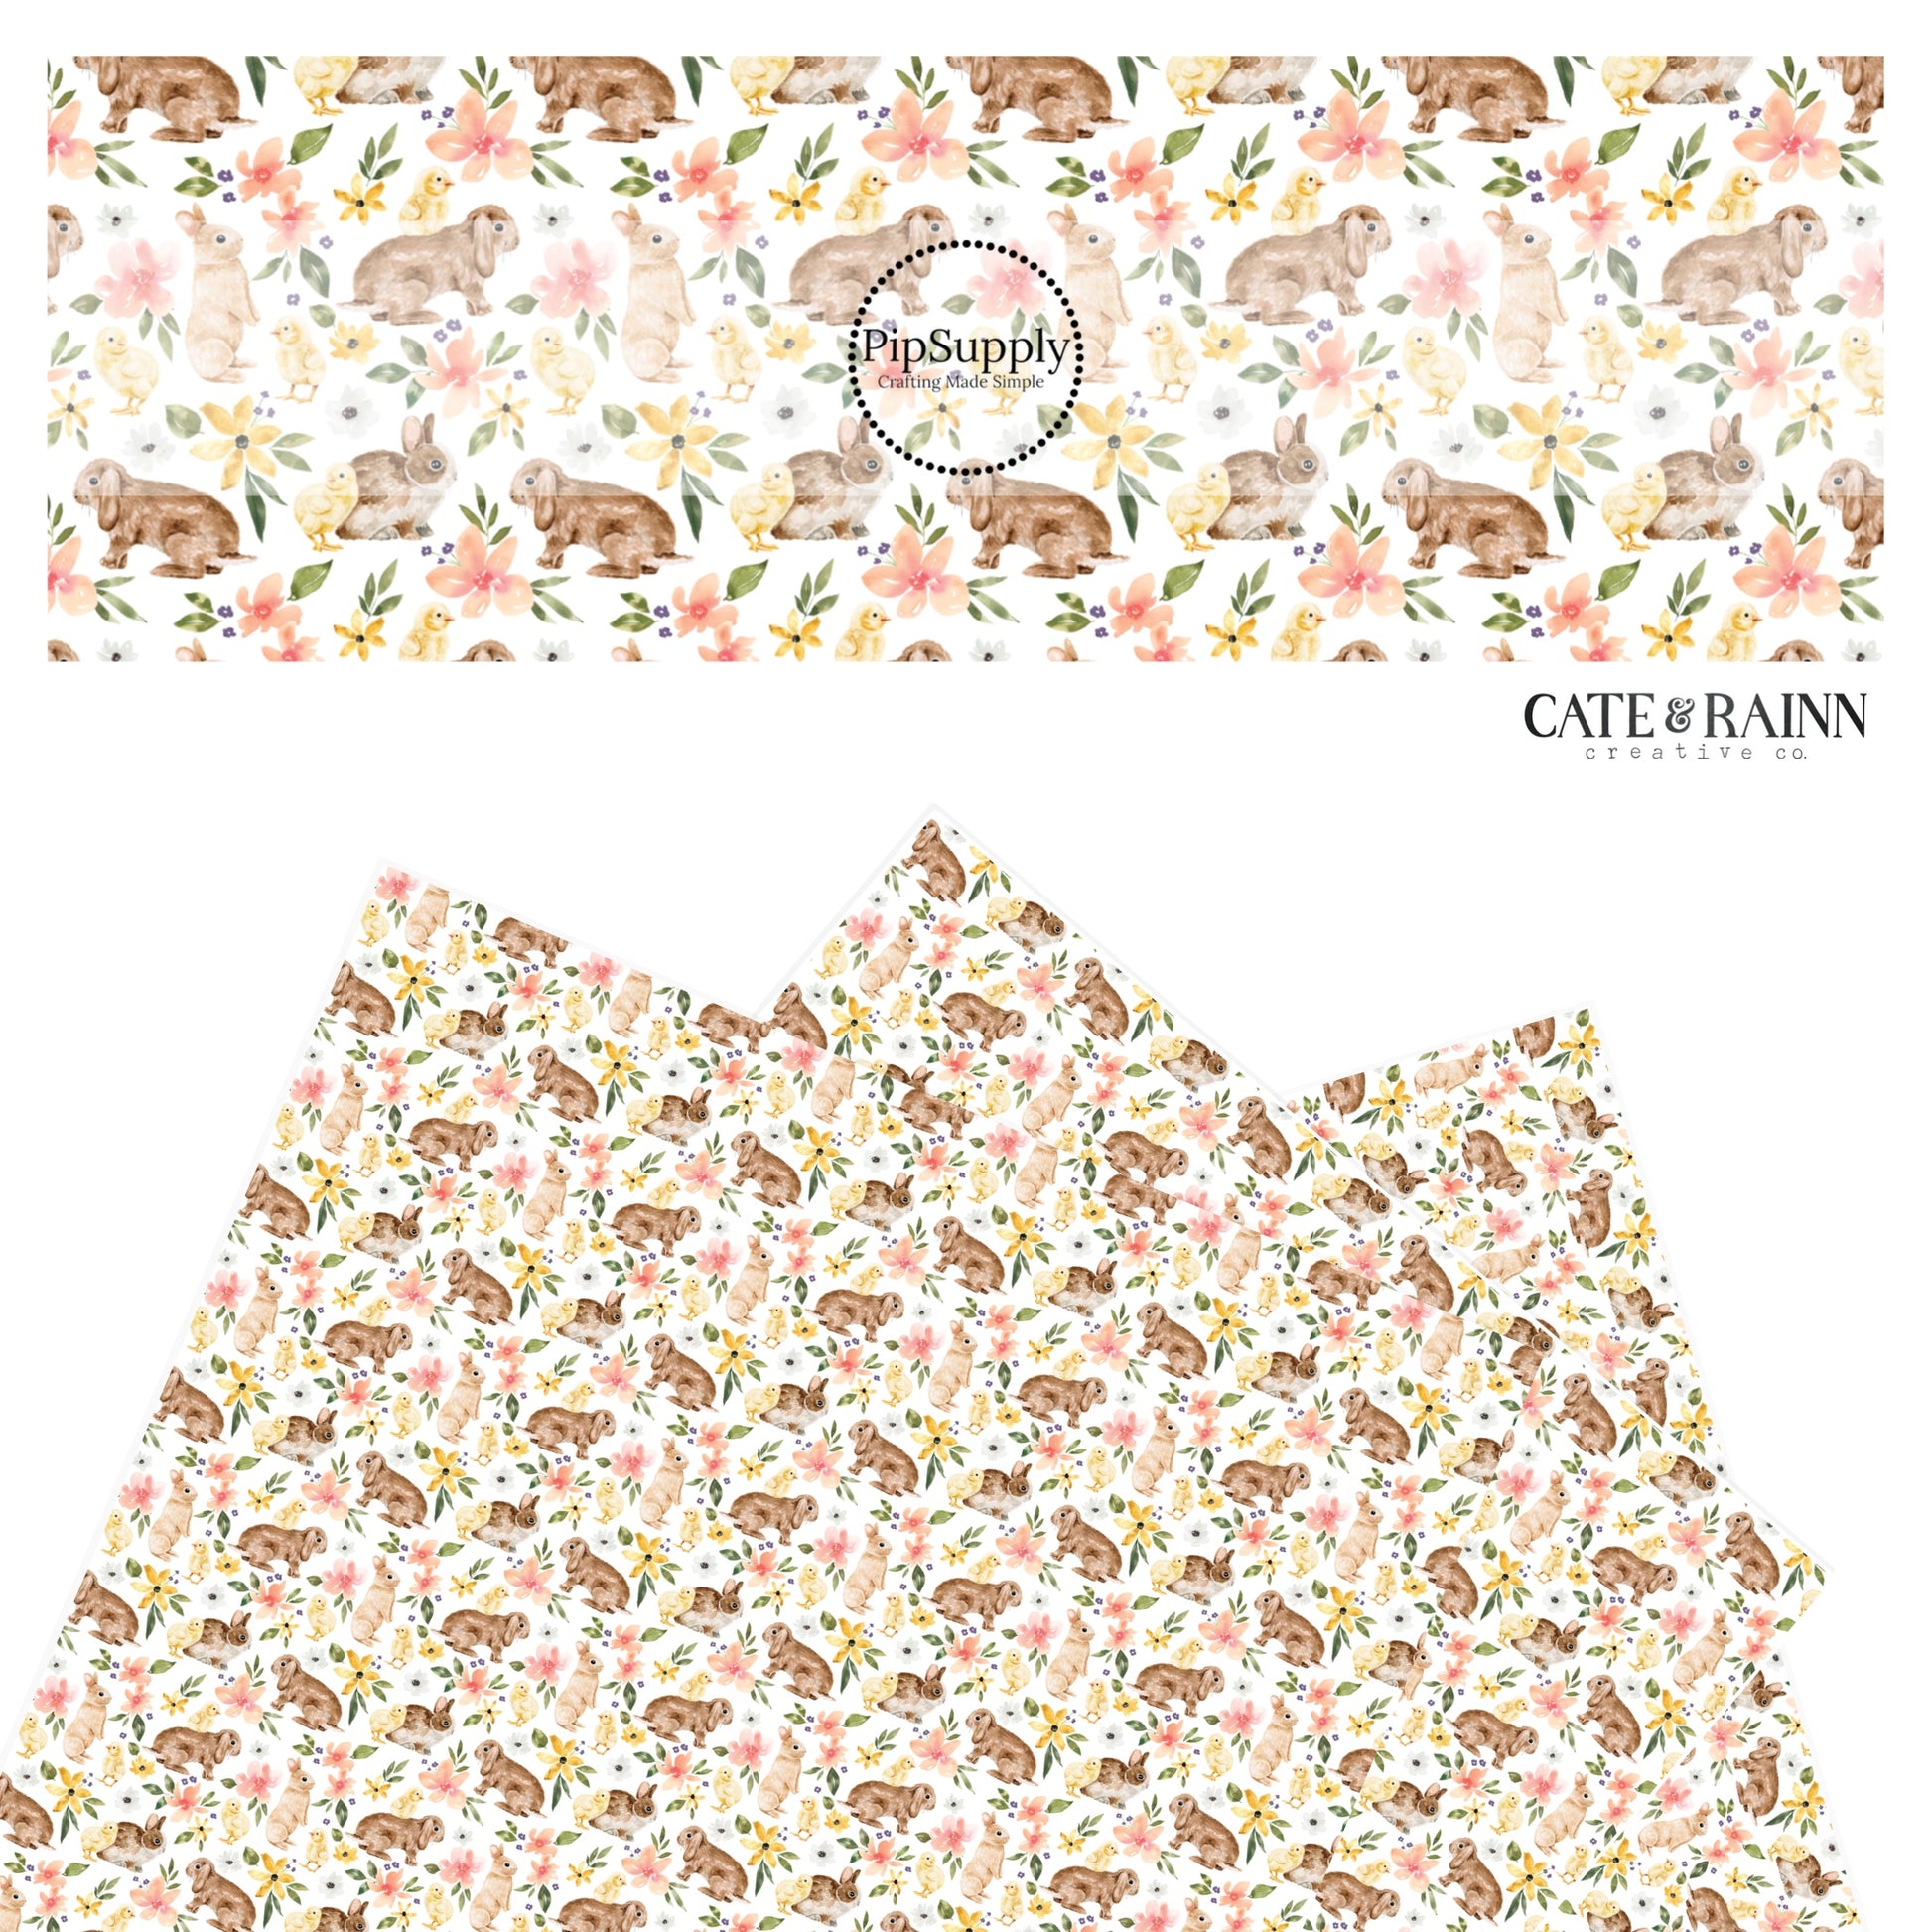 Yellow baby chicks and brown bunnies playing with flowers on white faux leather sheets